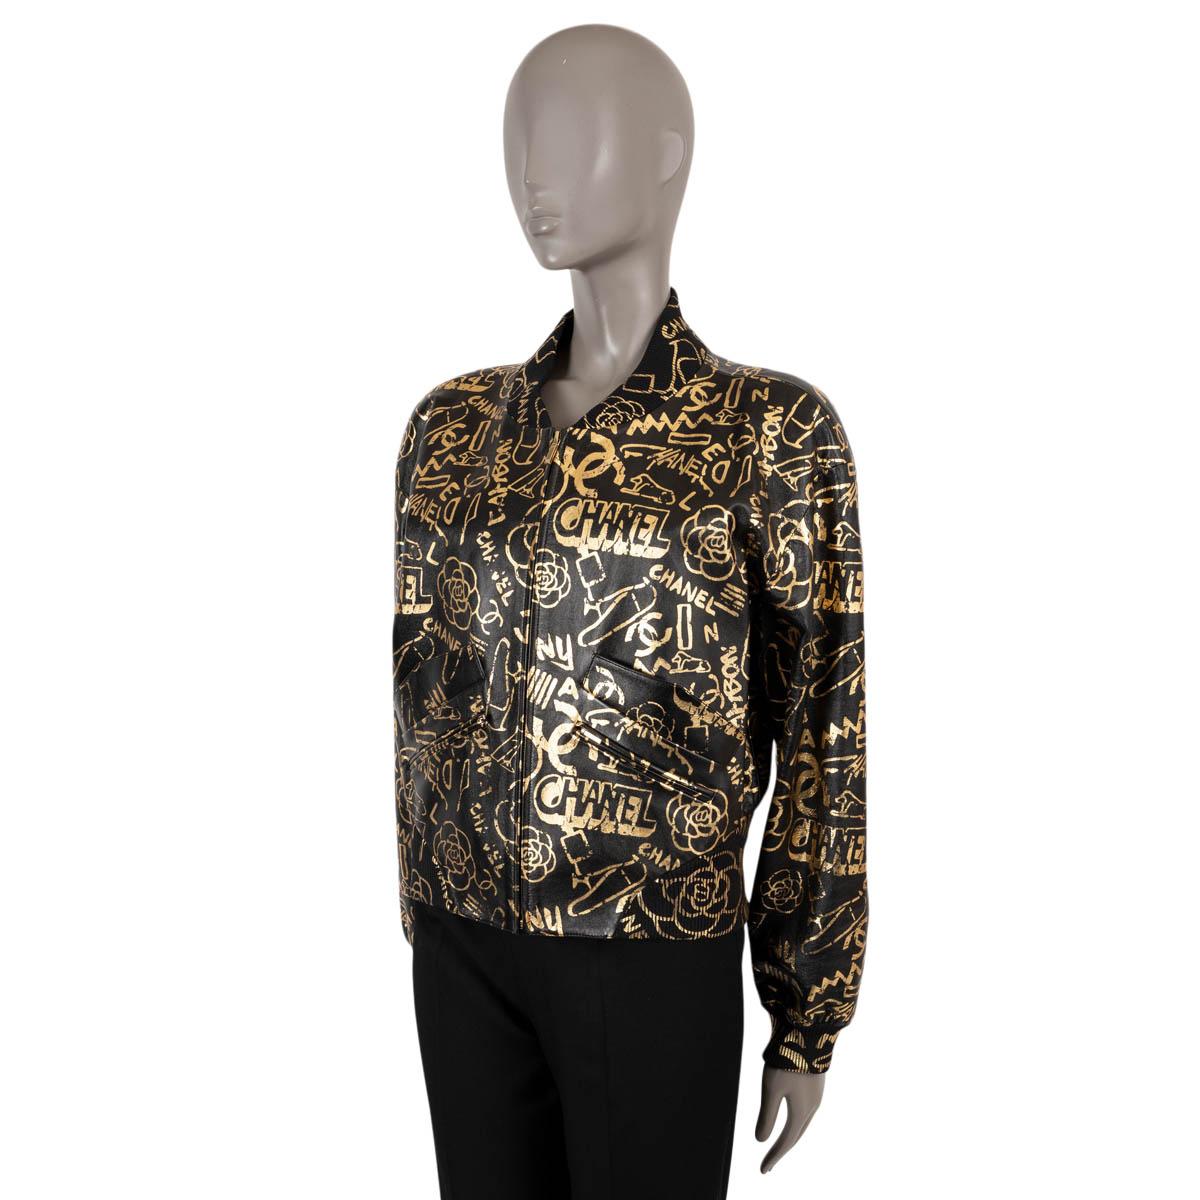 100% authentic Chanel bomber jacket in black lambskin leather (100%) with metallic gold graffiti print. Features two zip pockets at the waist, rib-knit neck, hem and cuffs. Closes with a zipper on the front and is lined in silk (100%). Has been worn